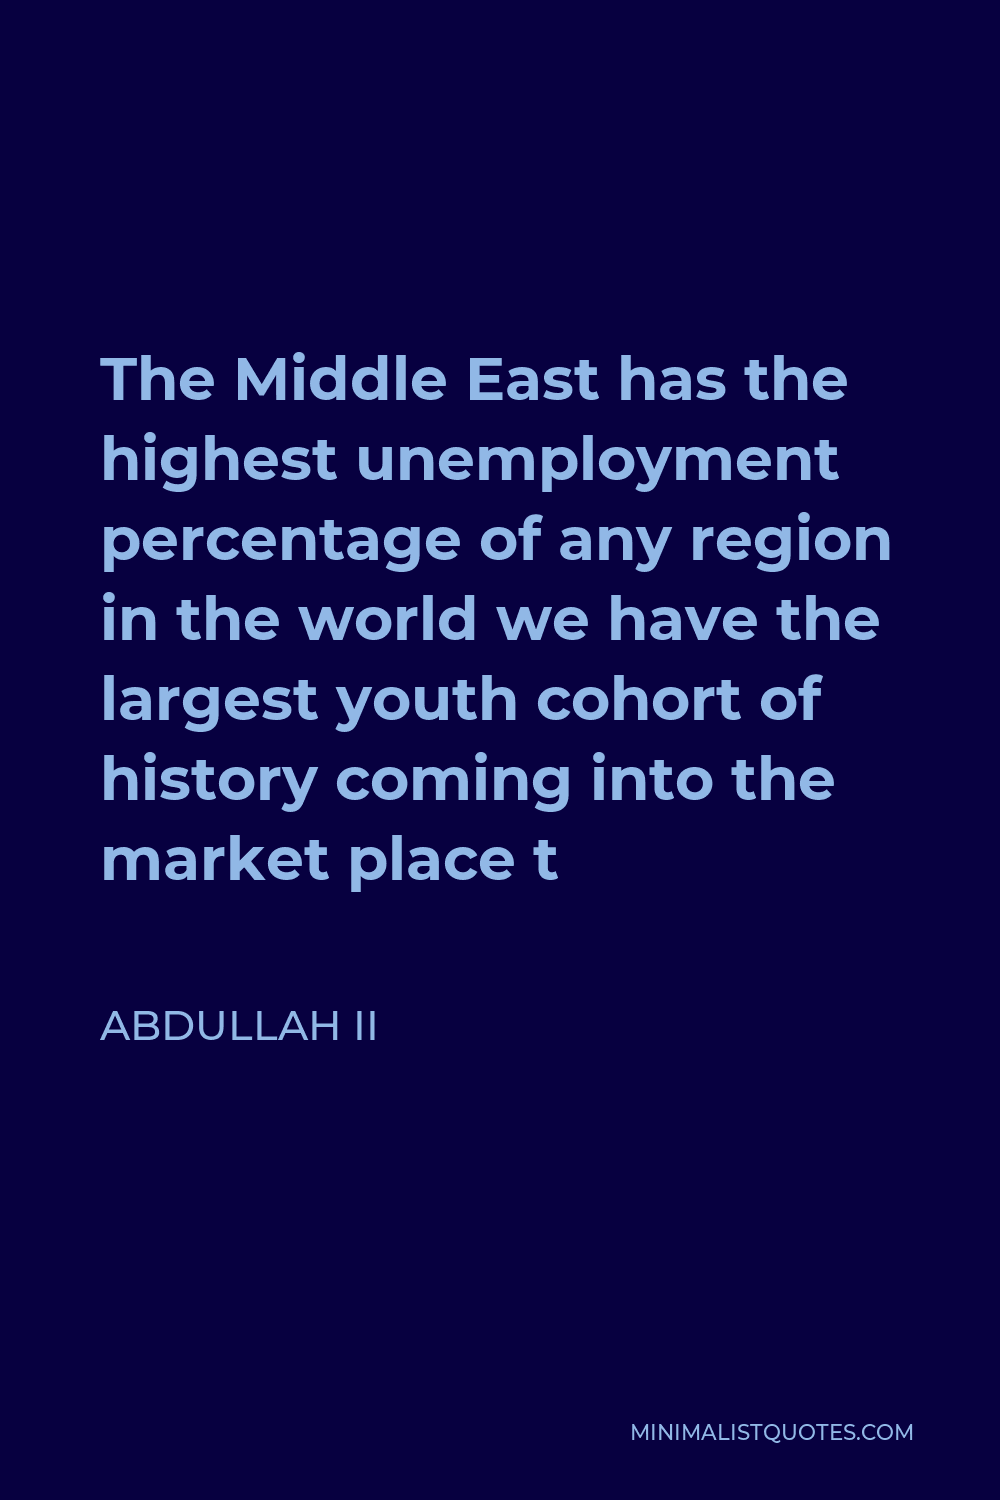 Abdullah II Quote - The Middle East has the highest unemployment percentage of any region in the world we have the largest youth cohort of history coming into the market place t